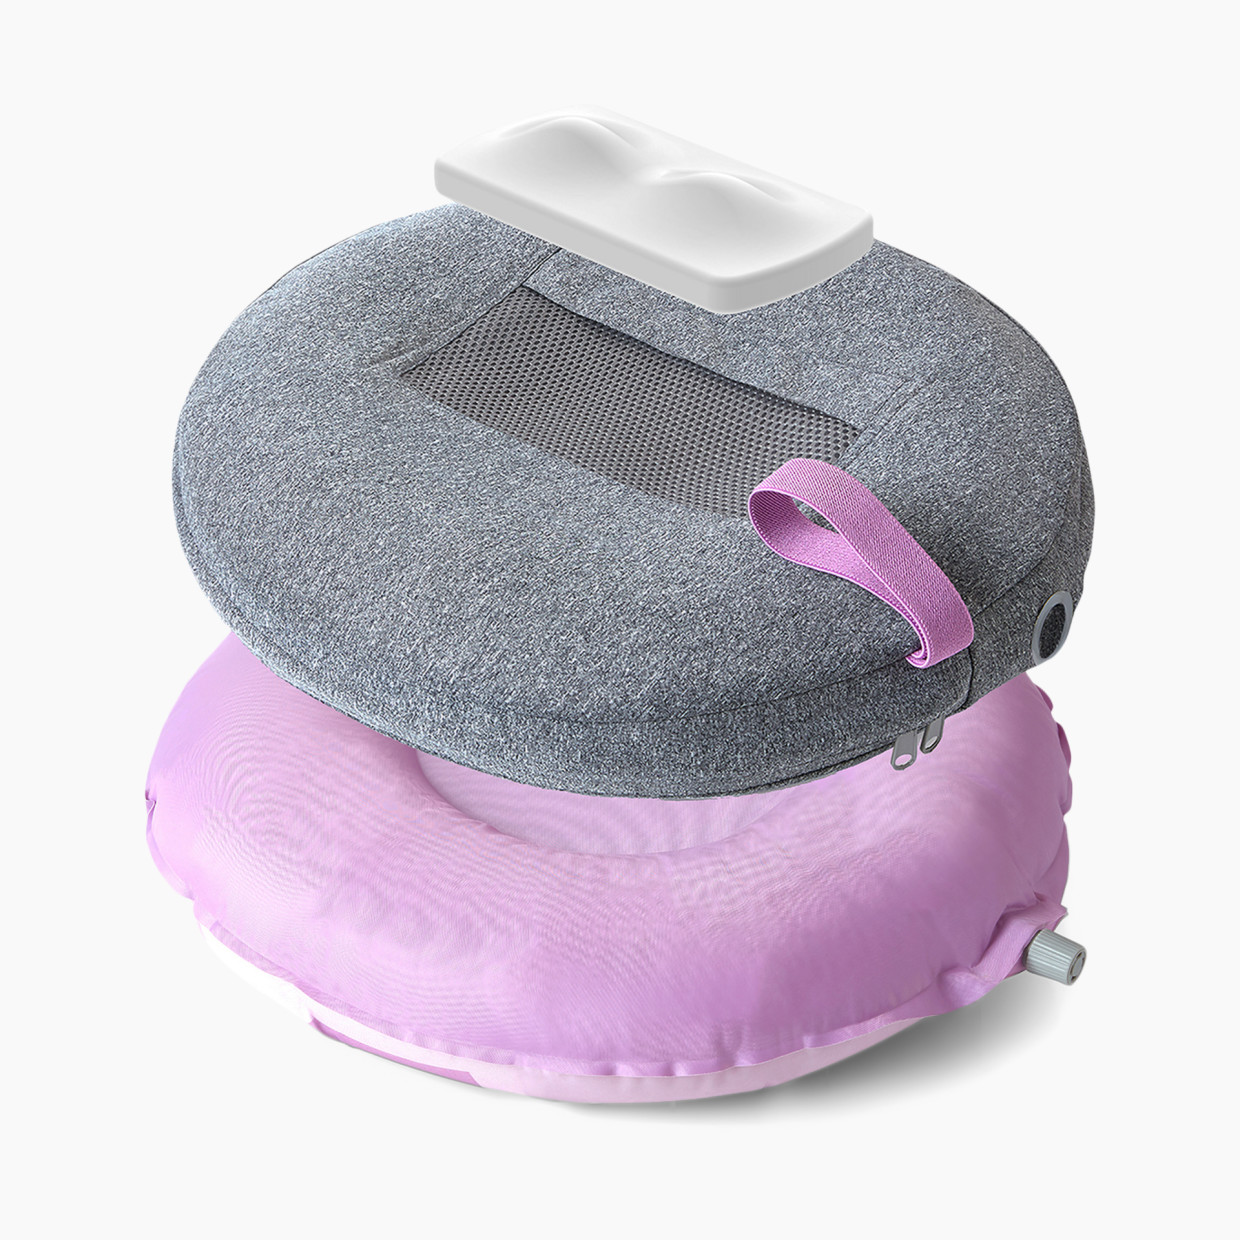 Frida Mom Perineal Cooling Comfort Cushion - Donut Pillow